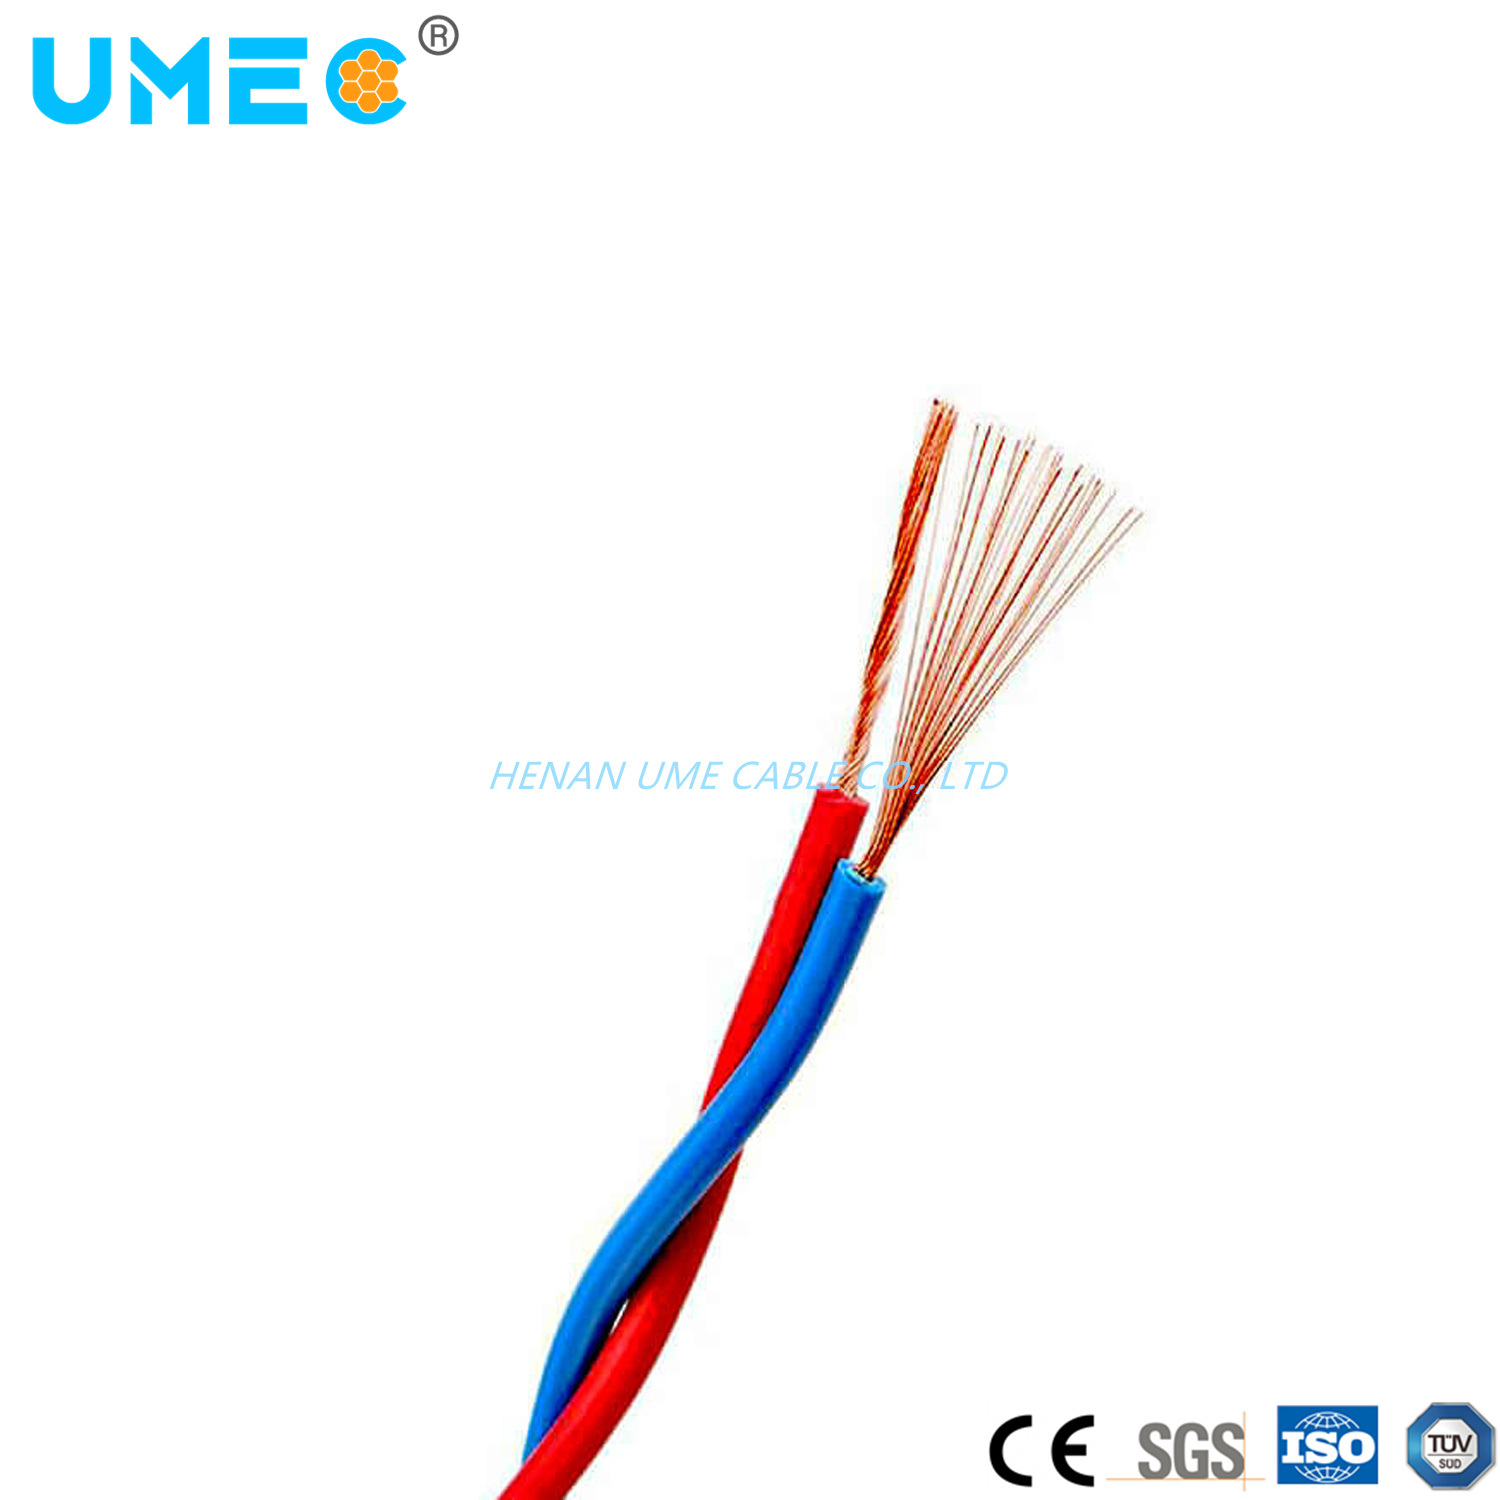 China Ume Zr-Rvs Extra Flexible Electrical Cables and Wire1mm2 to 150mm2 300/500V Twisted-Pair Wire Rvs